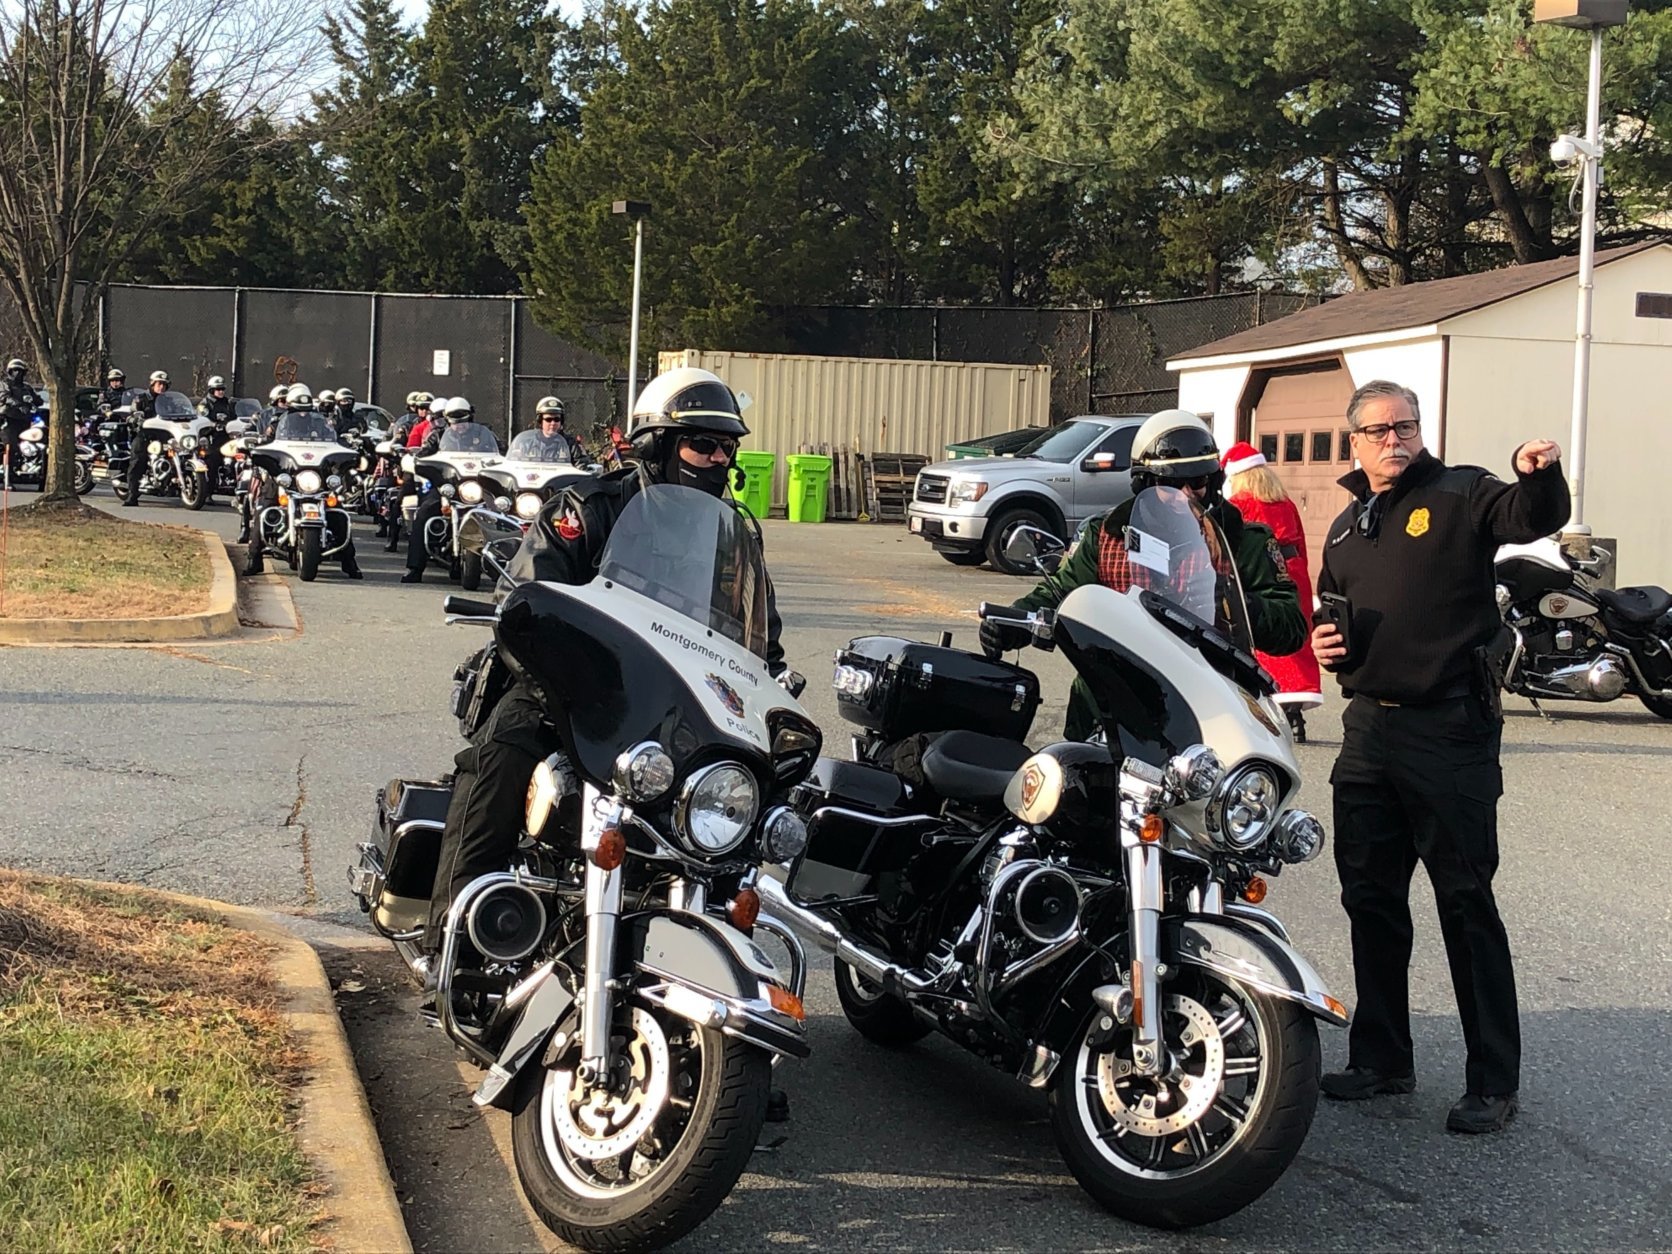 The jolly elf ditched the reindeer for Wednesday's gift run. In their place was an escort of 30 police officers on motorcycles. (WTOP/Melissa Howell)